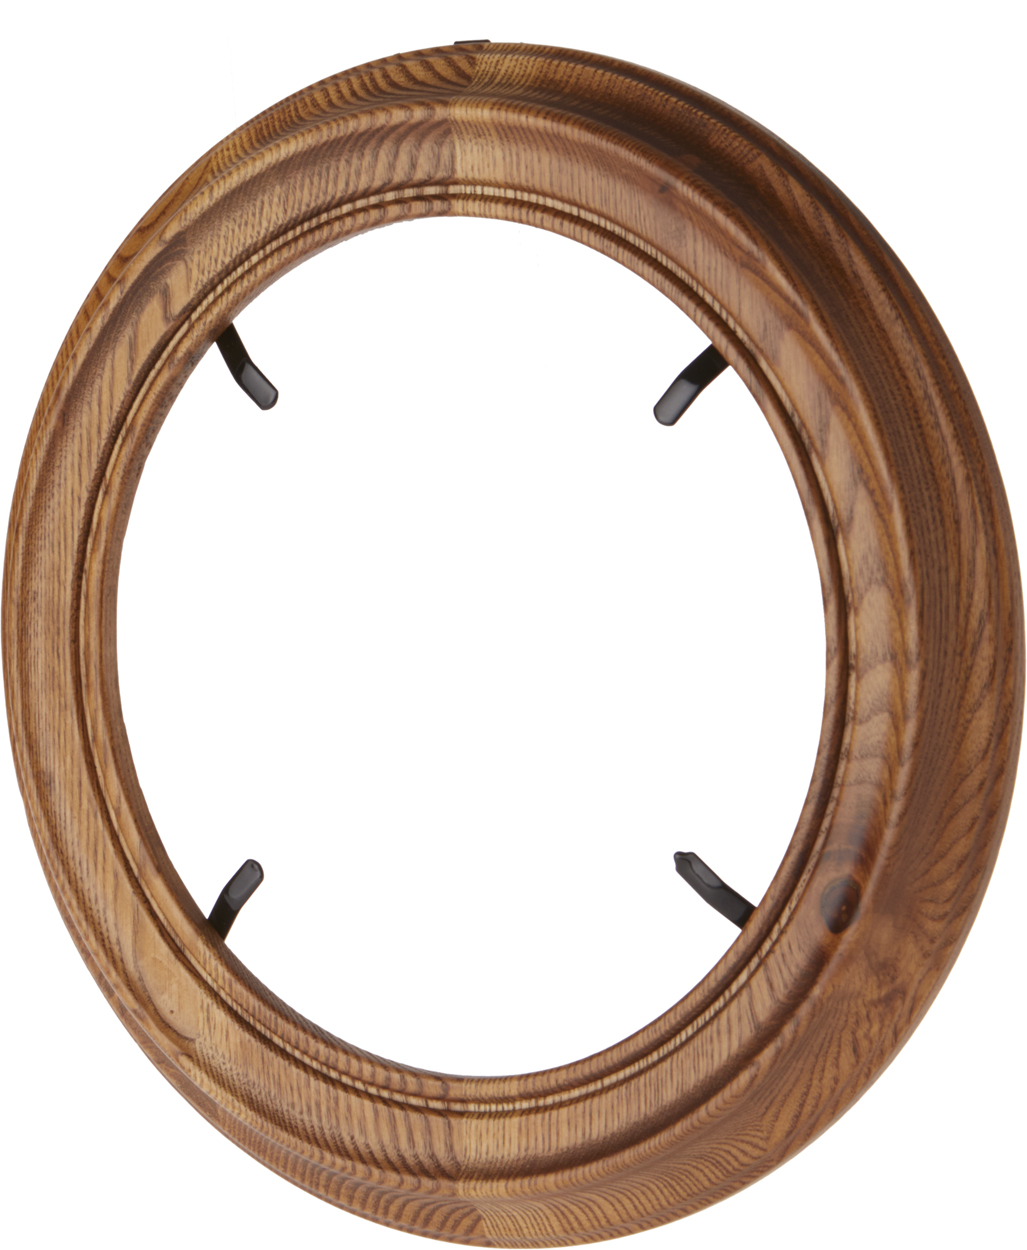 Bard's Red Oak Finish Round Wall Mountable Plate Frame, 11.25" H x 11.25" W x 0.5" D (For 8.25" - 9.25" Plates)